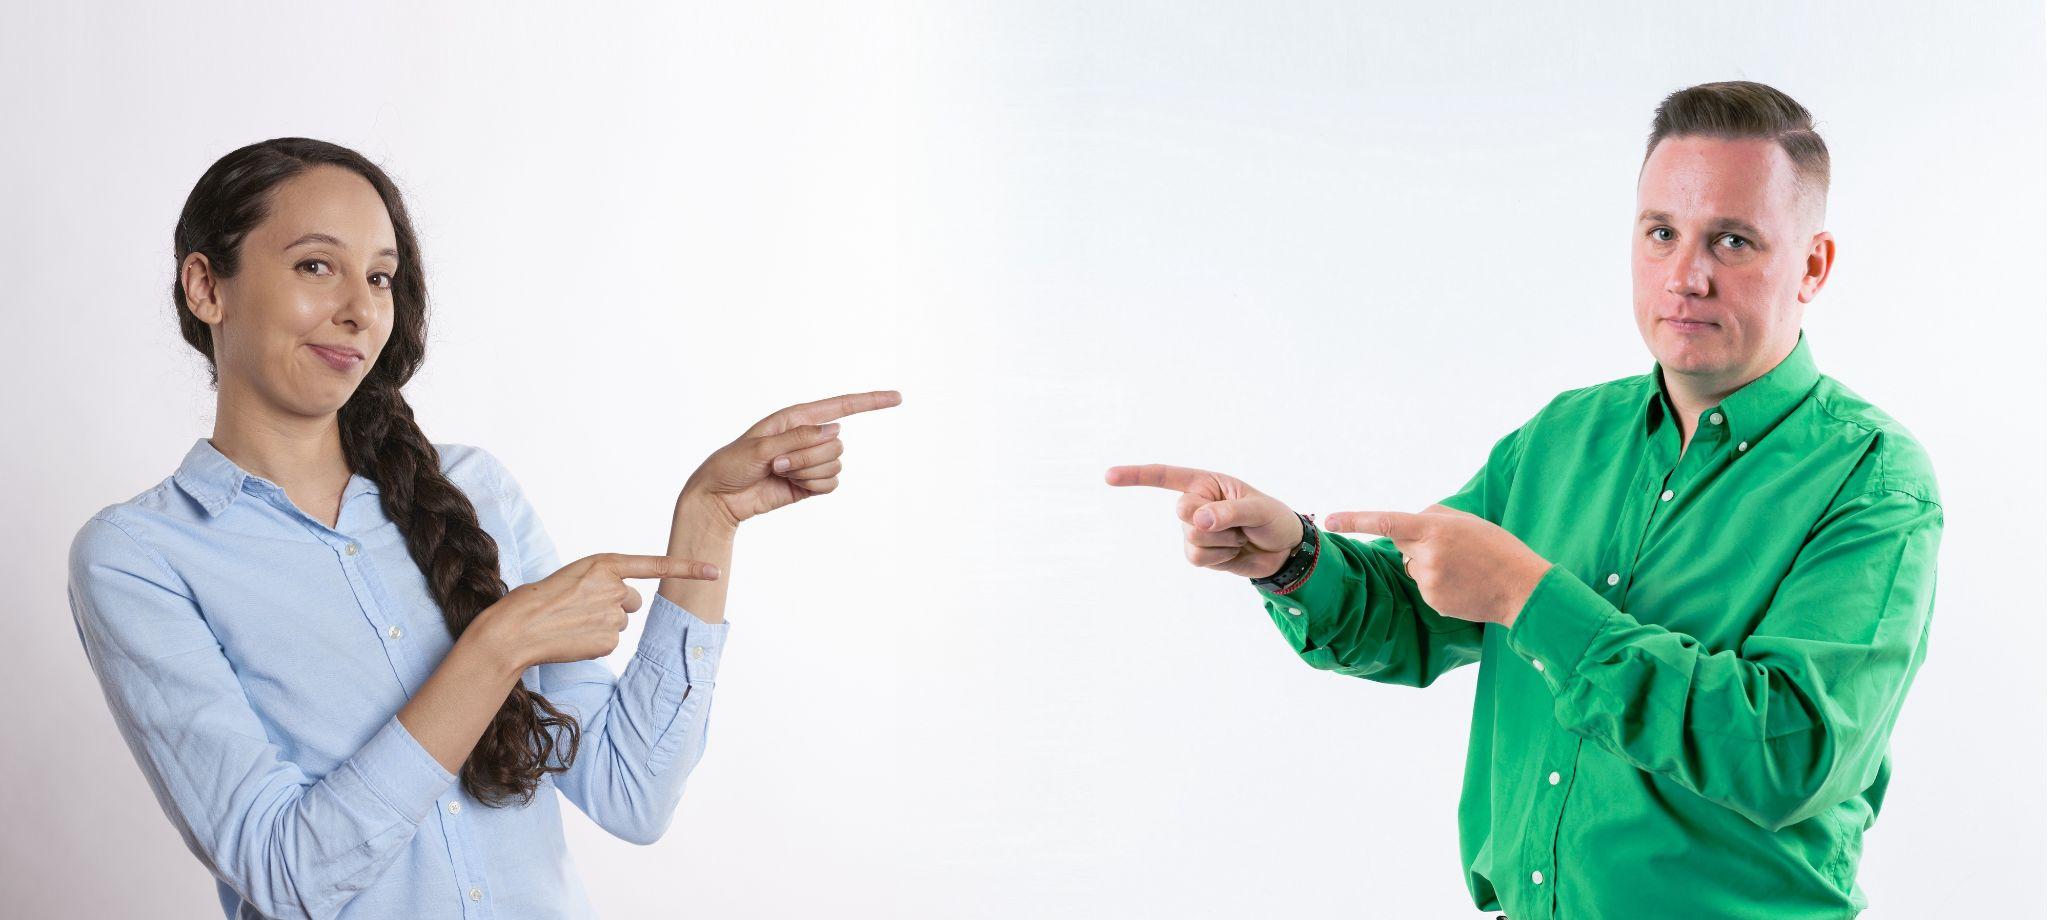 A man and woman are pointing at each other. The woman, with long dark hair in a light blue shirt, looks stern. The man, sporting short hair and a green shirt, has an equally serious expression. 